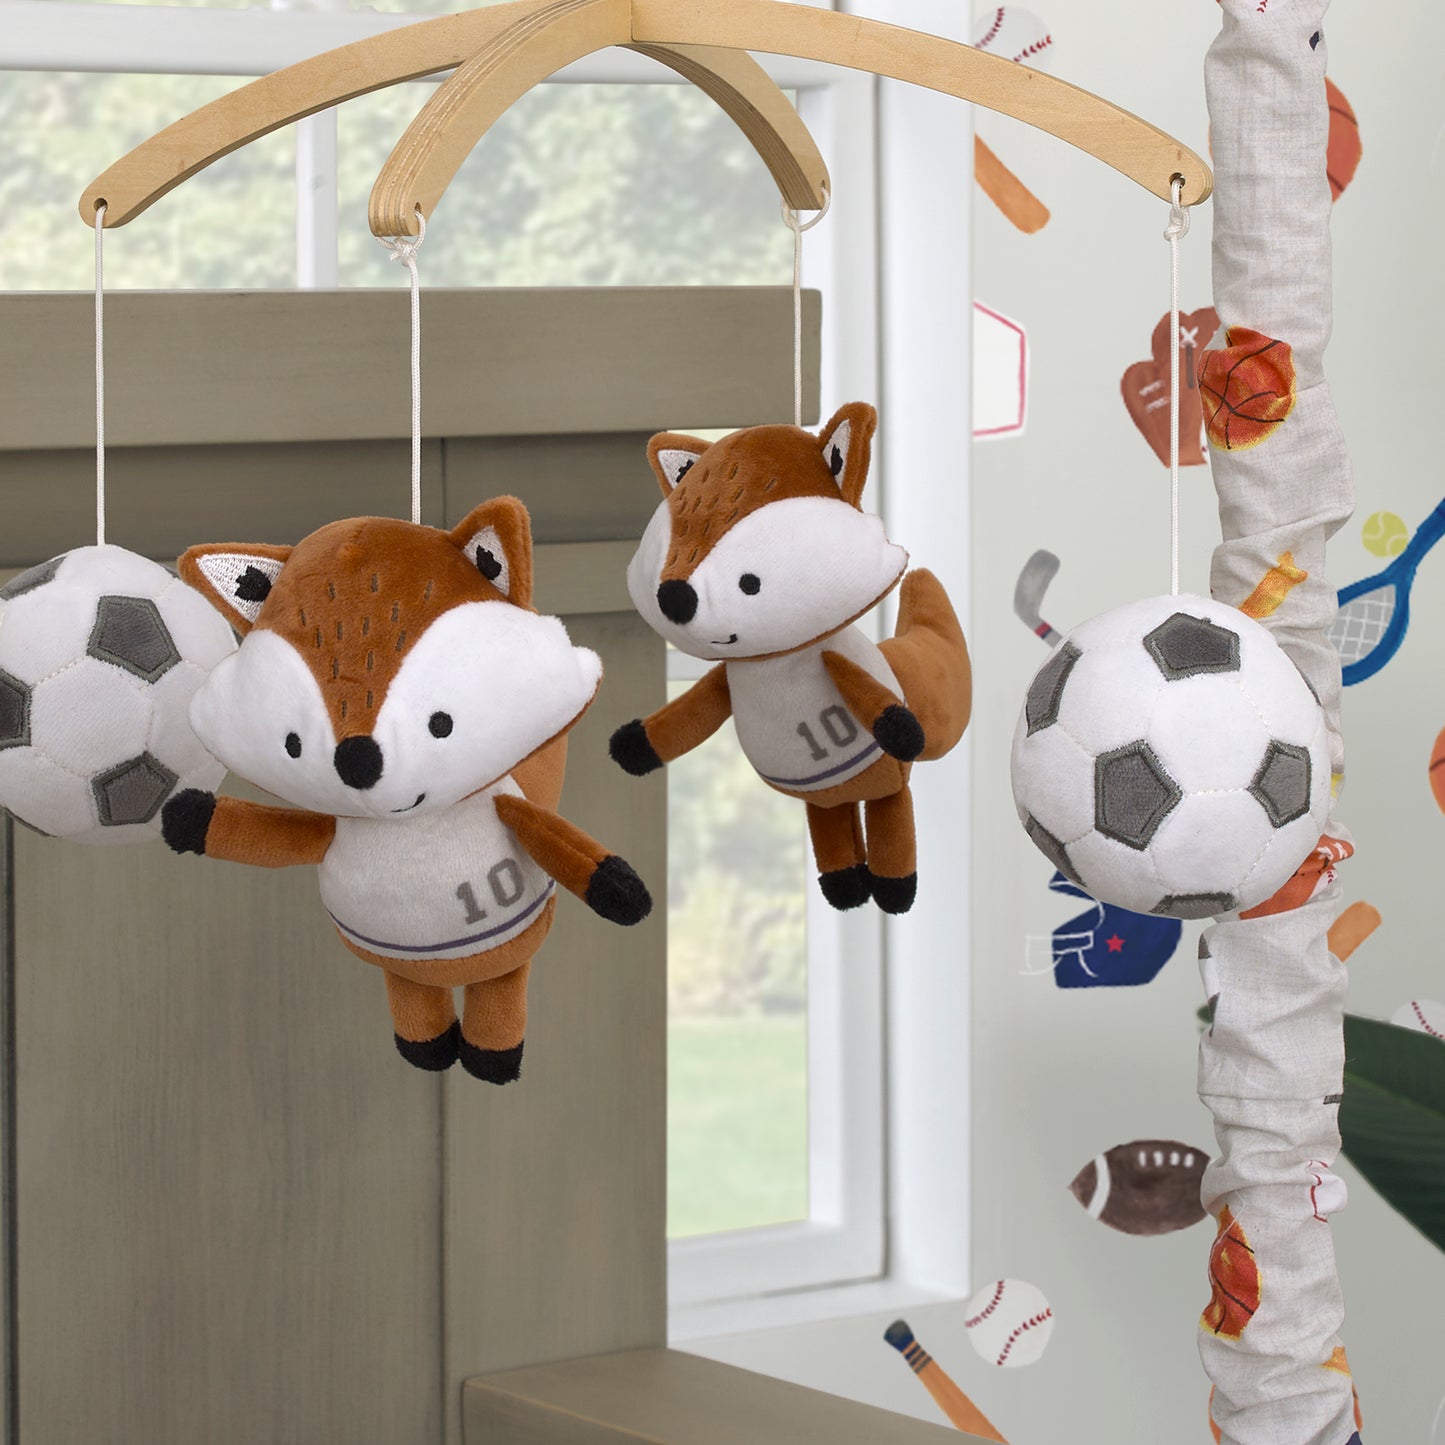 NoJo Team All Star Brown, White, Black and Grey, Fox with Soccer Balls Plush Musical Mobile